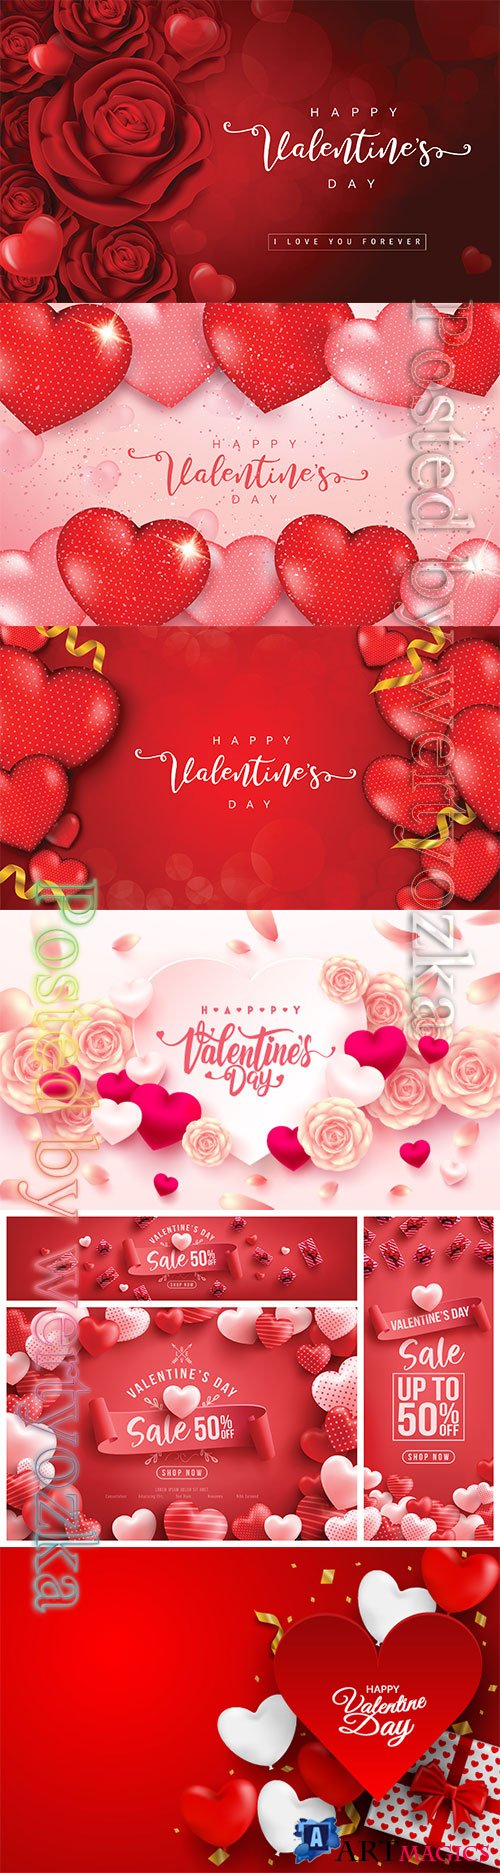 Background for Love and Valentine's day